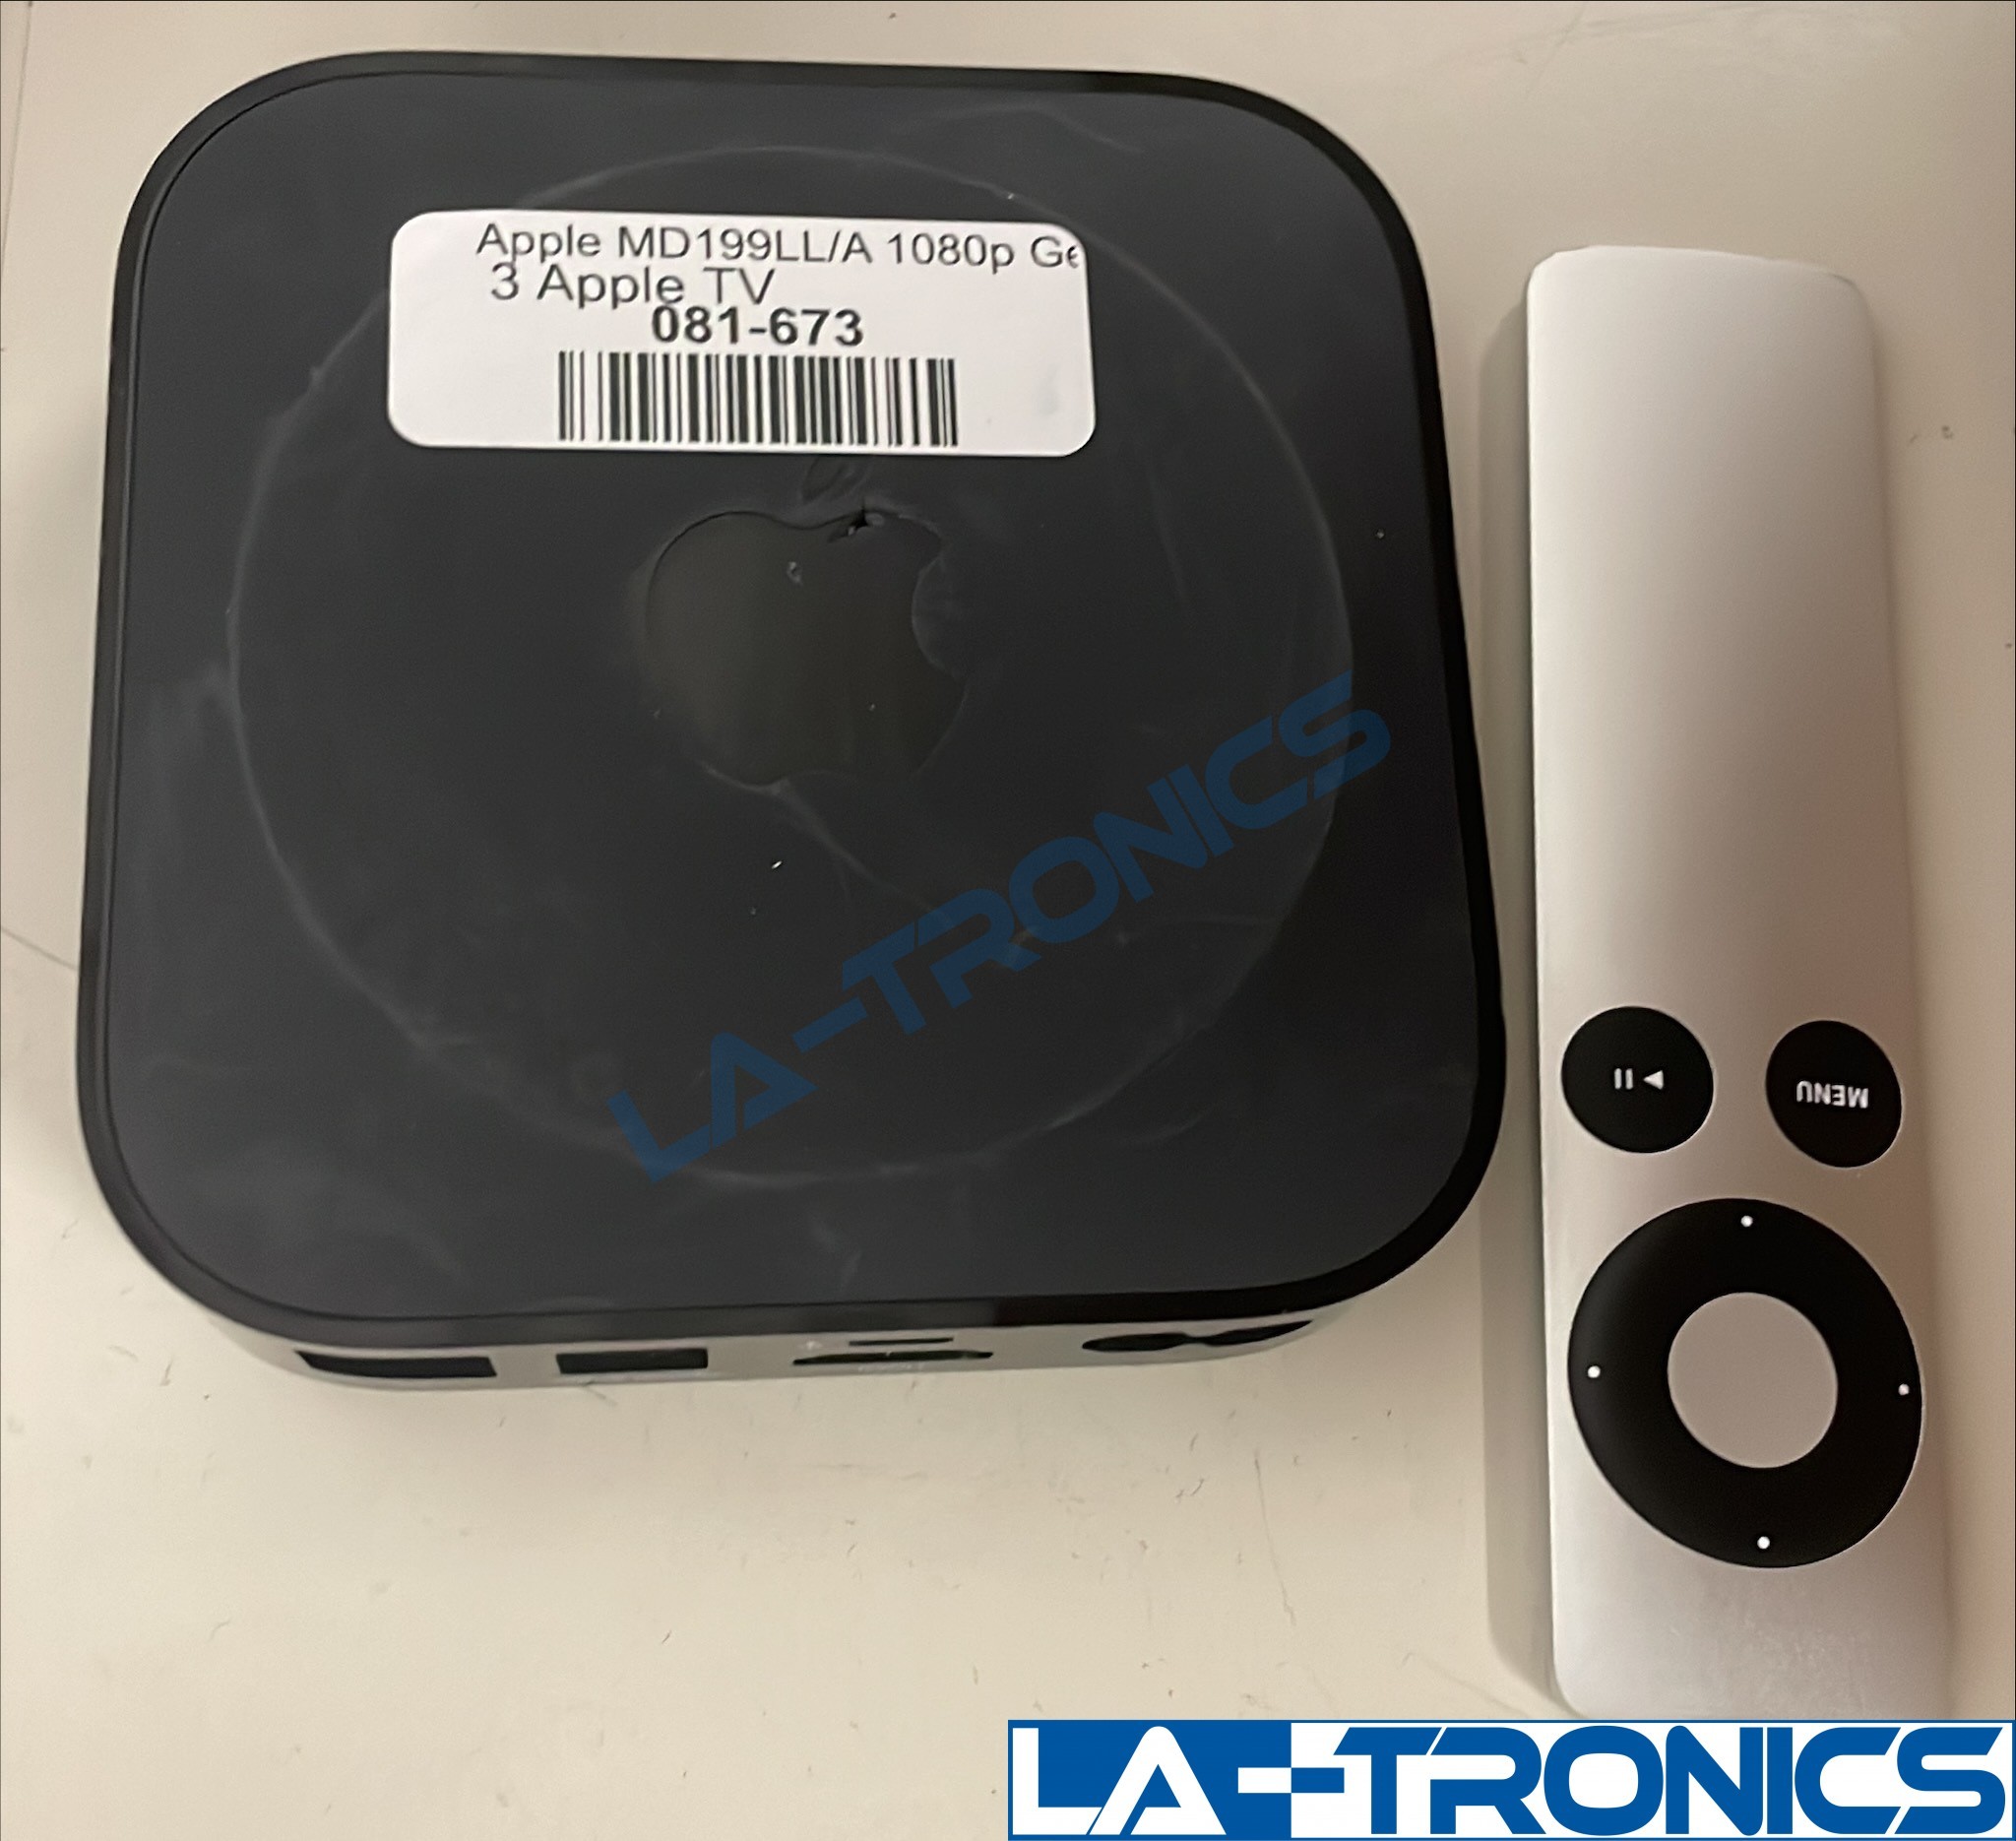 Apple TV A1427 3rd Generation Smart Media Streaming Player MD199LL/A